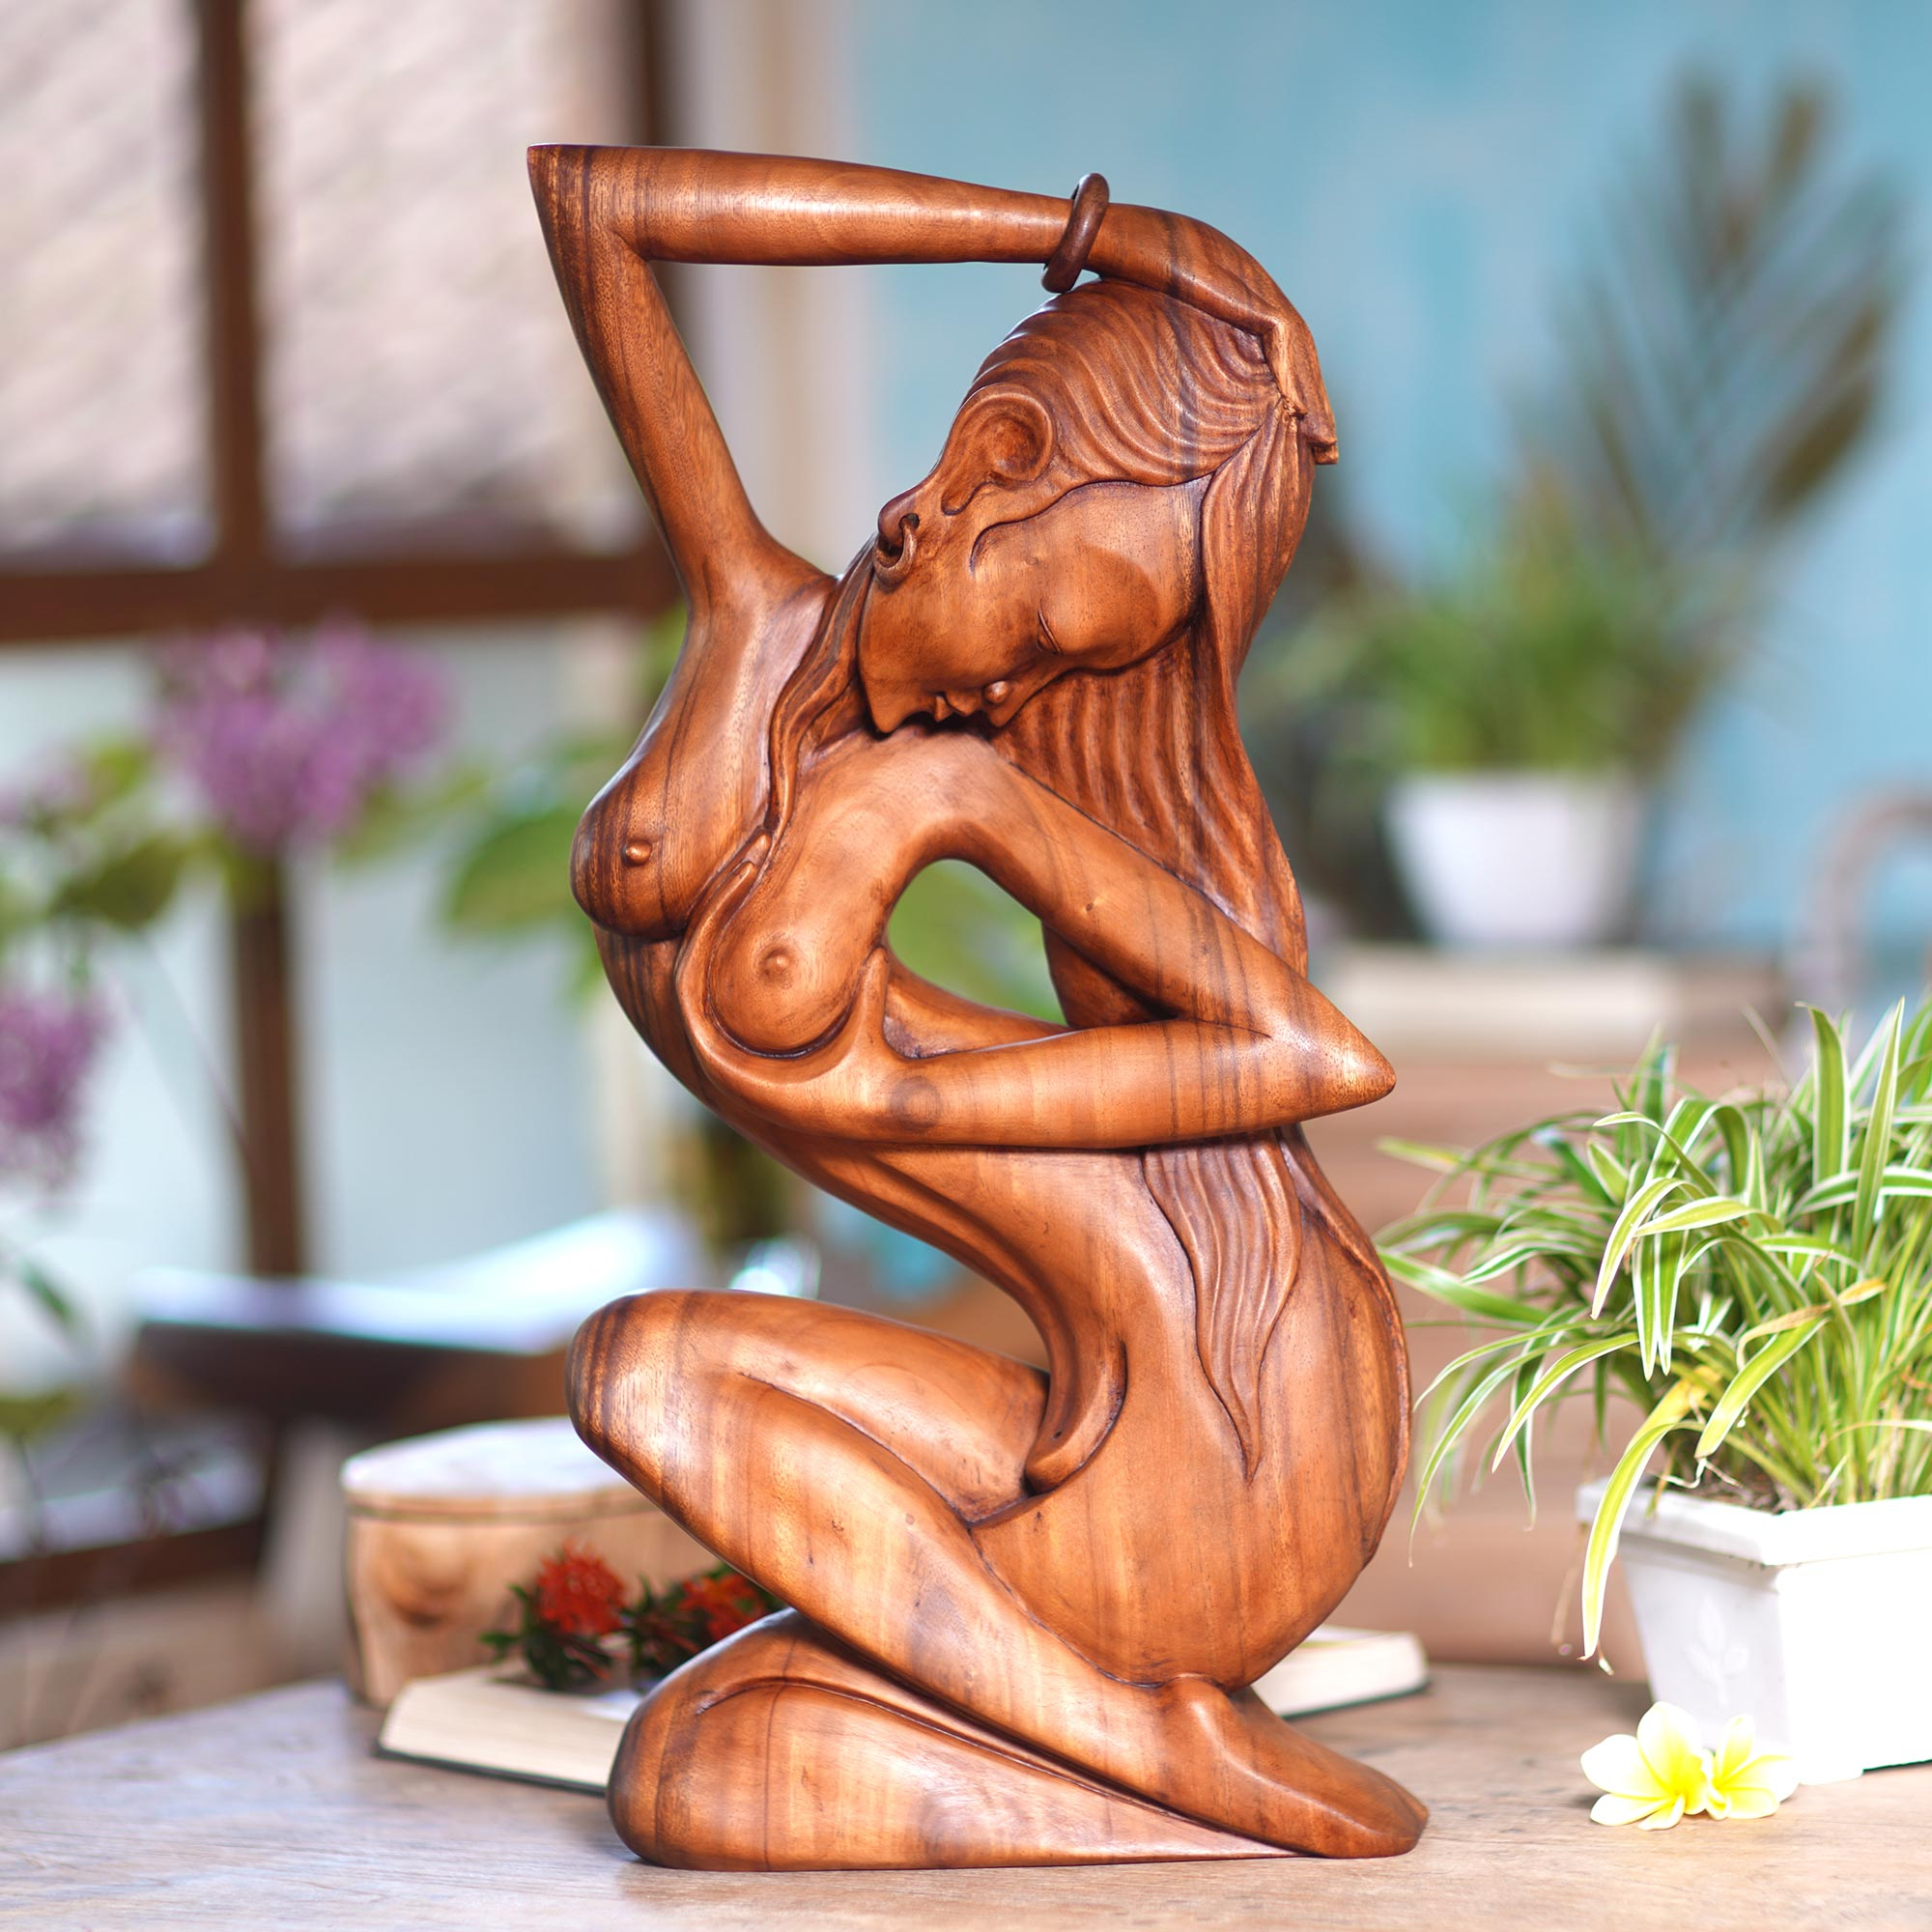 Nude in wood